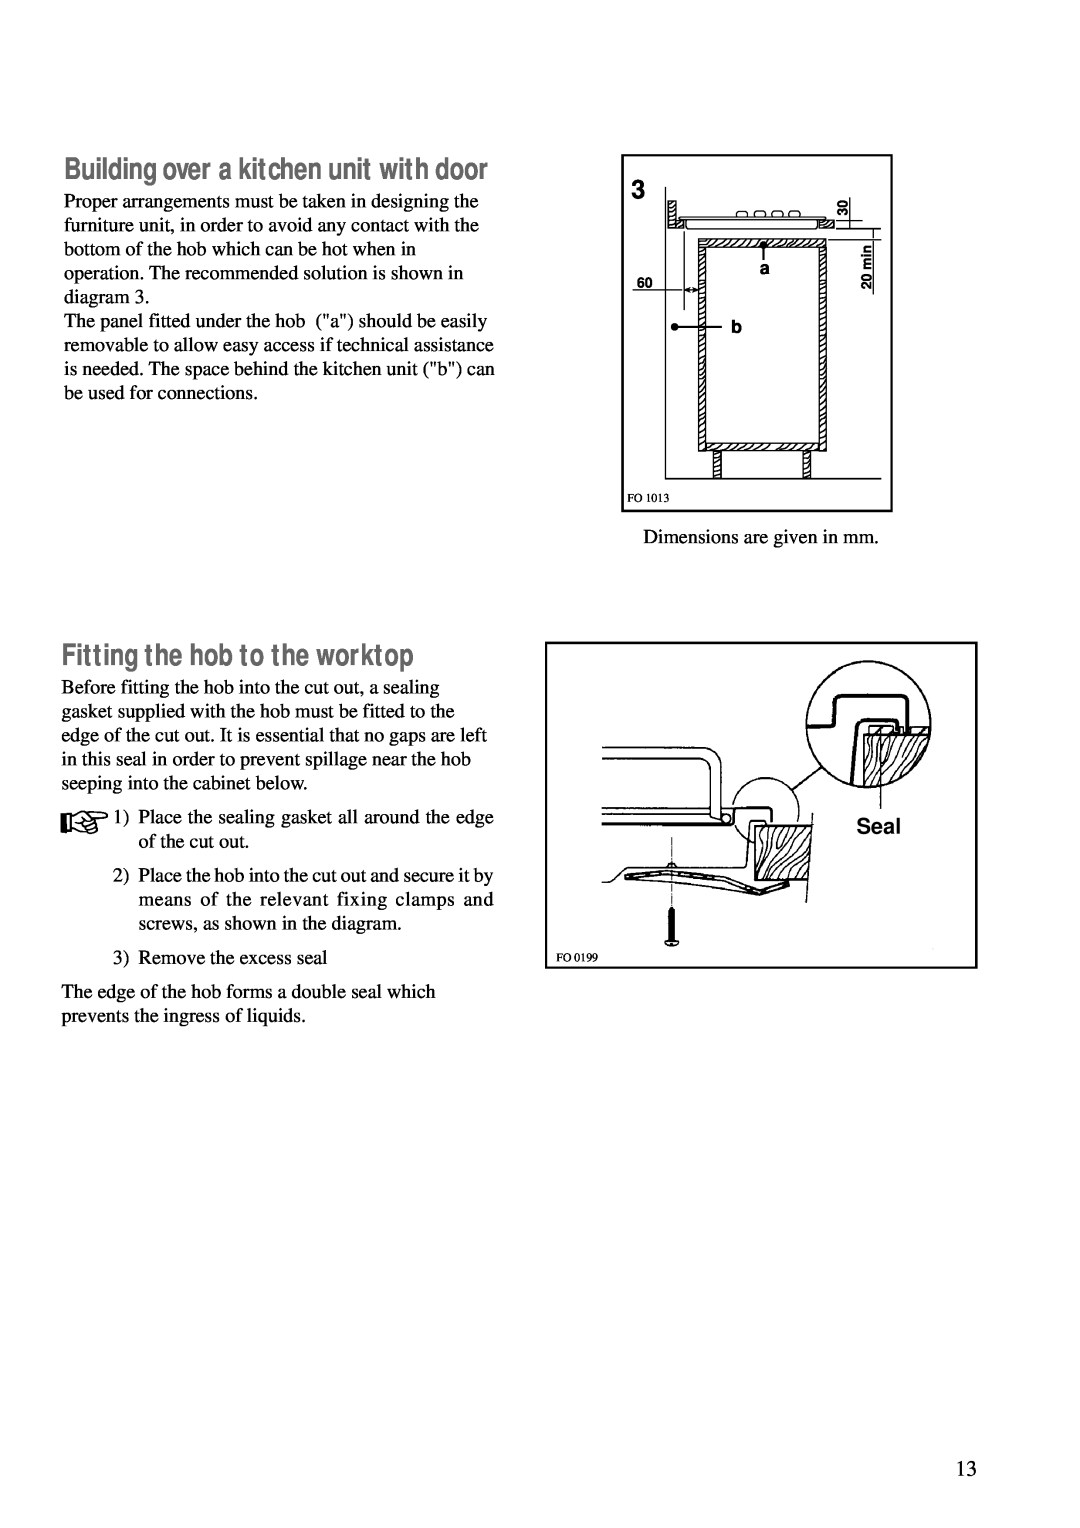 Zanussi ZEA 85 manual Fitting the hob to the worktop, Seal, Building over a kitchen unit with door 